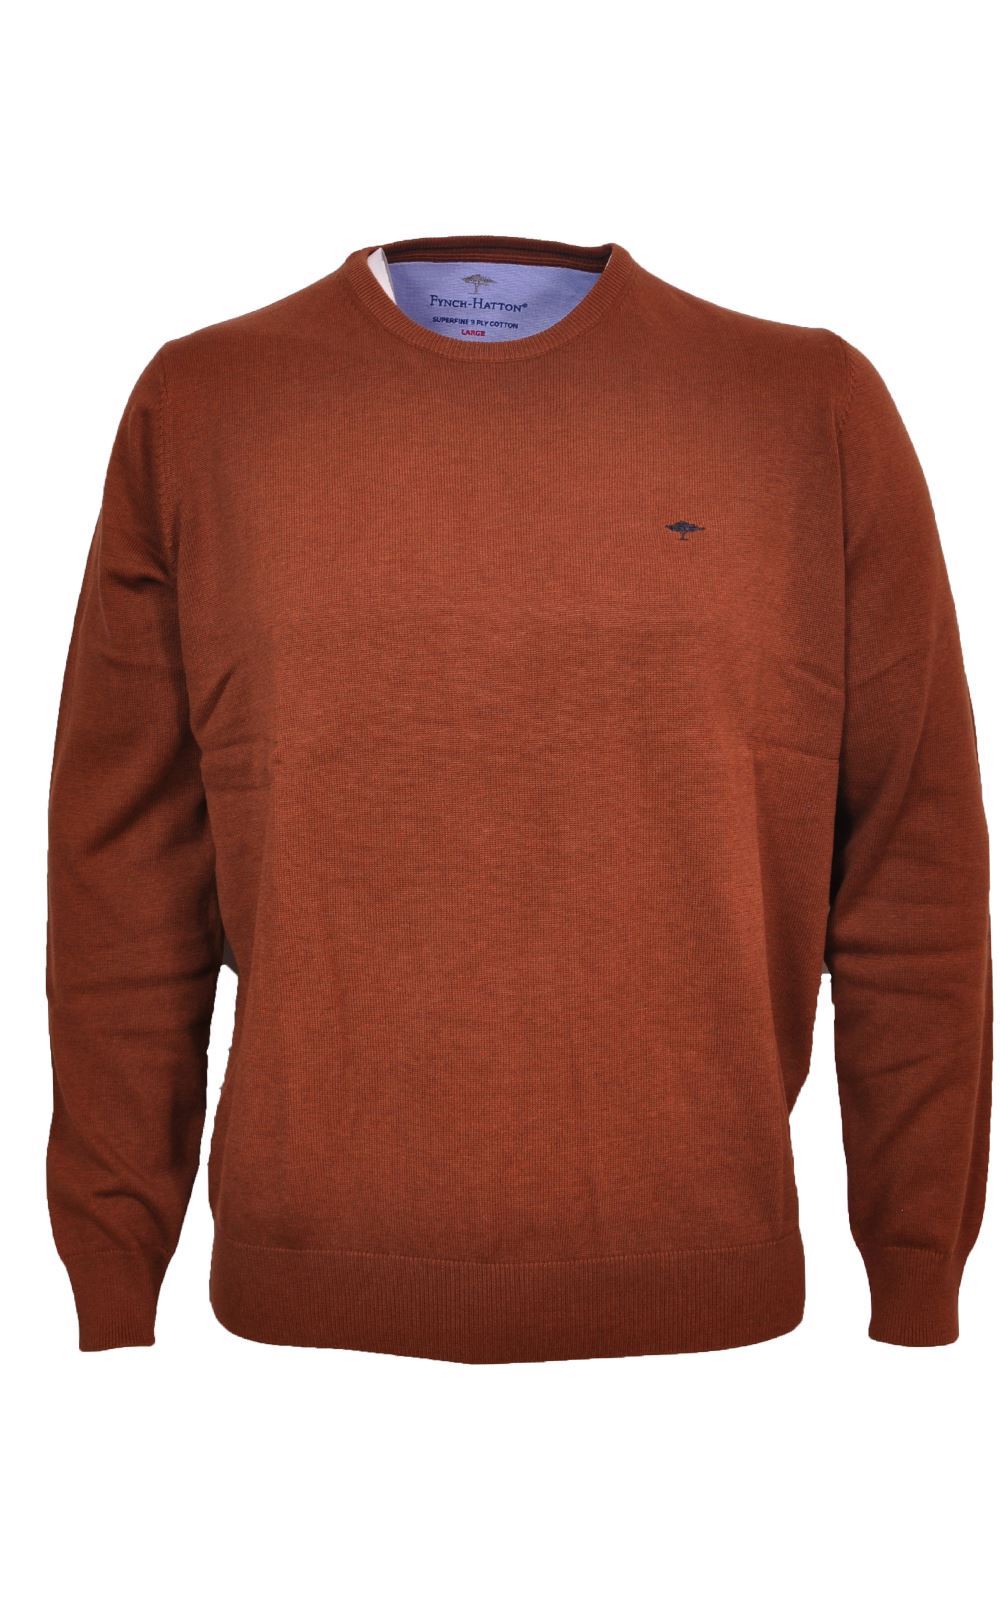 Moore. Crew 1213-210 Pullover S&T Neck Fynch-Hatton